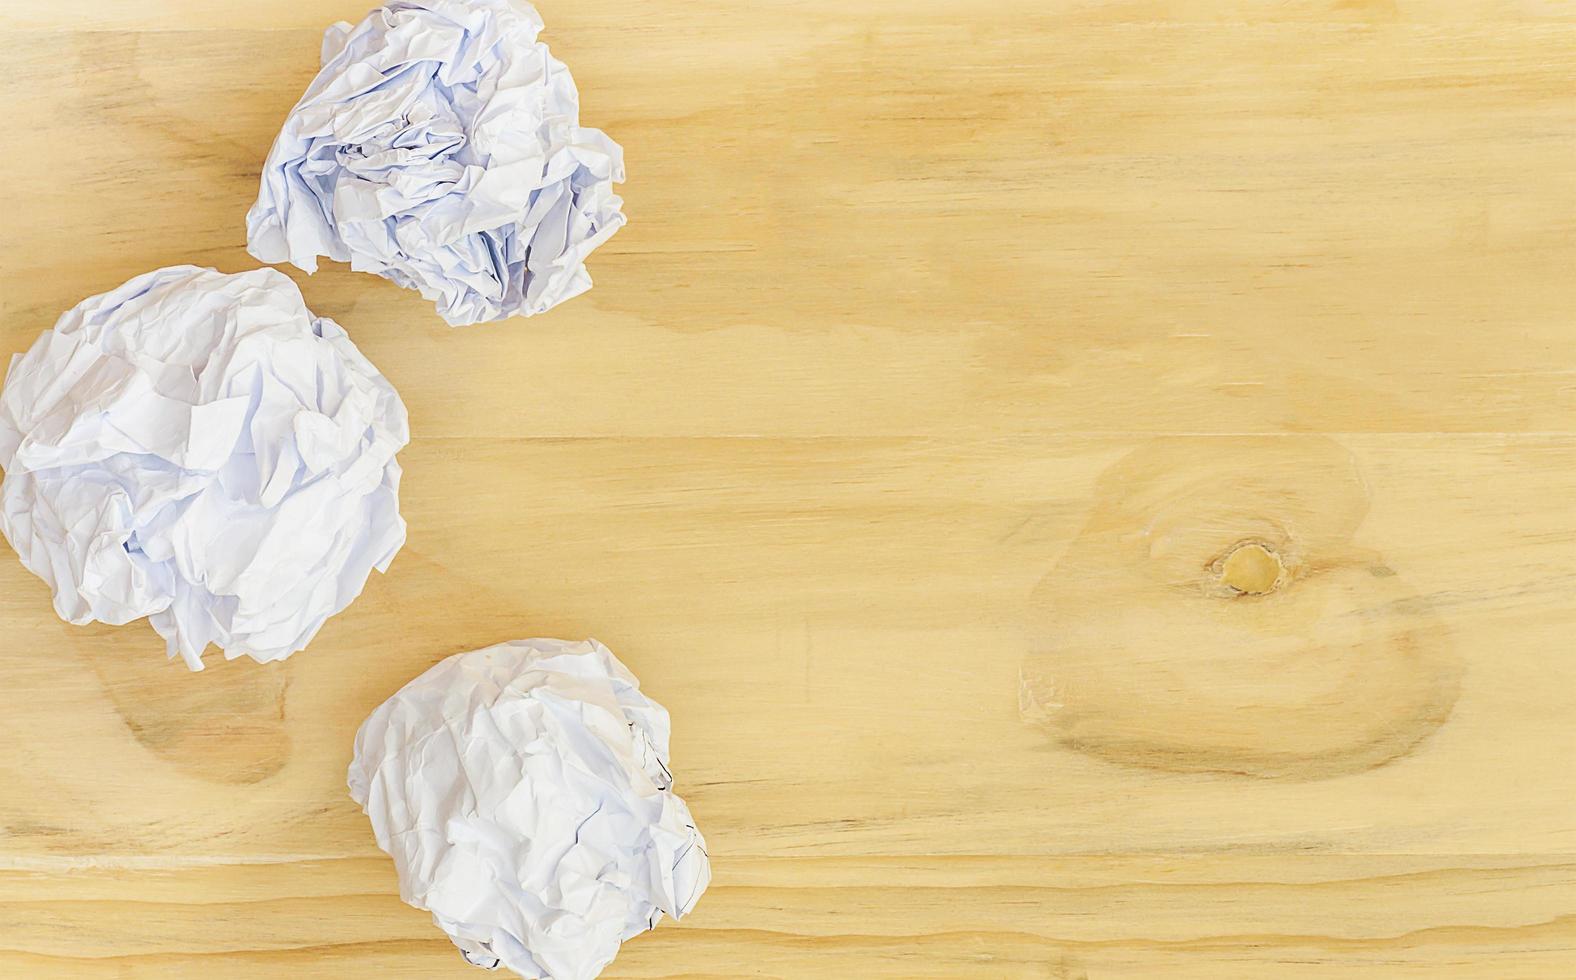 Crumpled paper balls over wooden surface with copyspace photo